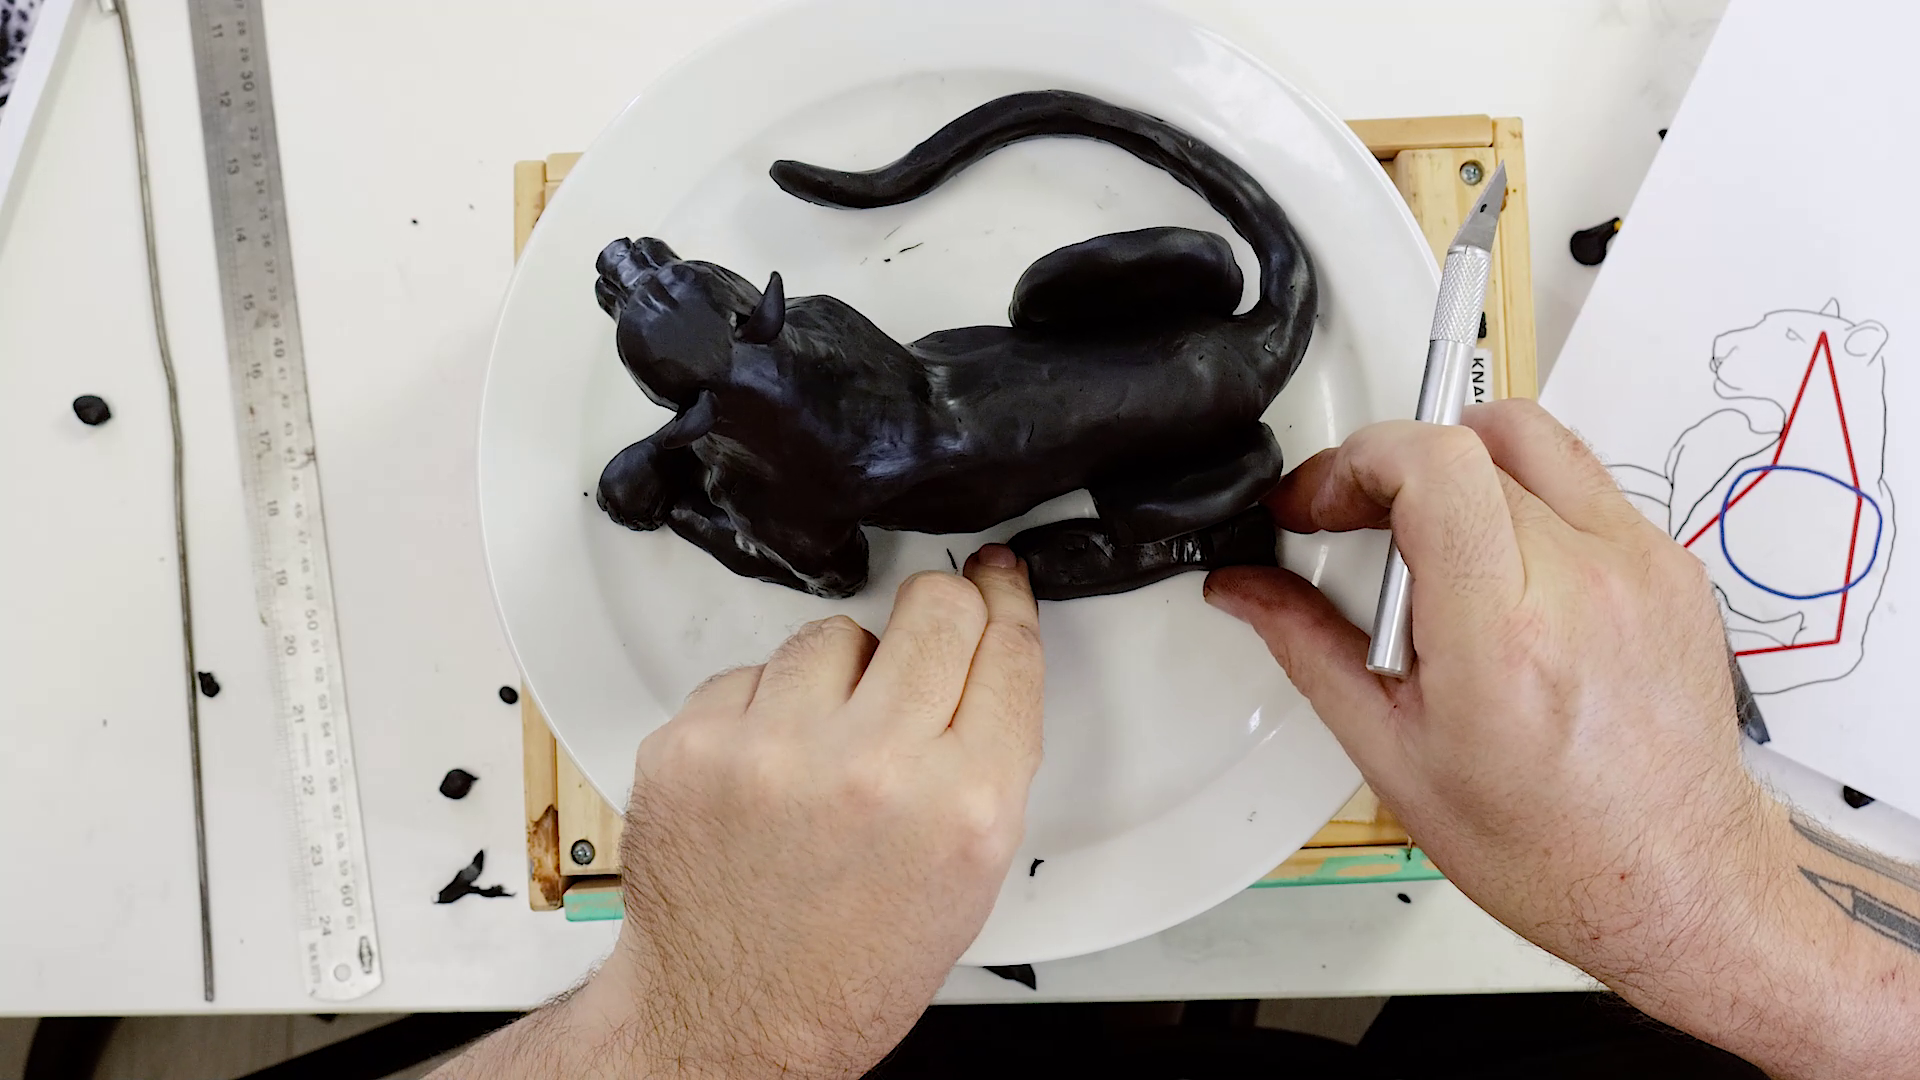 Sculpting the hind legs with black polymer clay and a precision knife